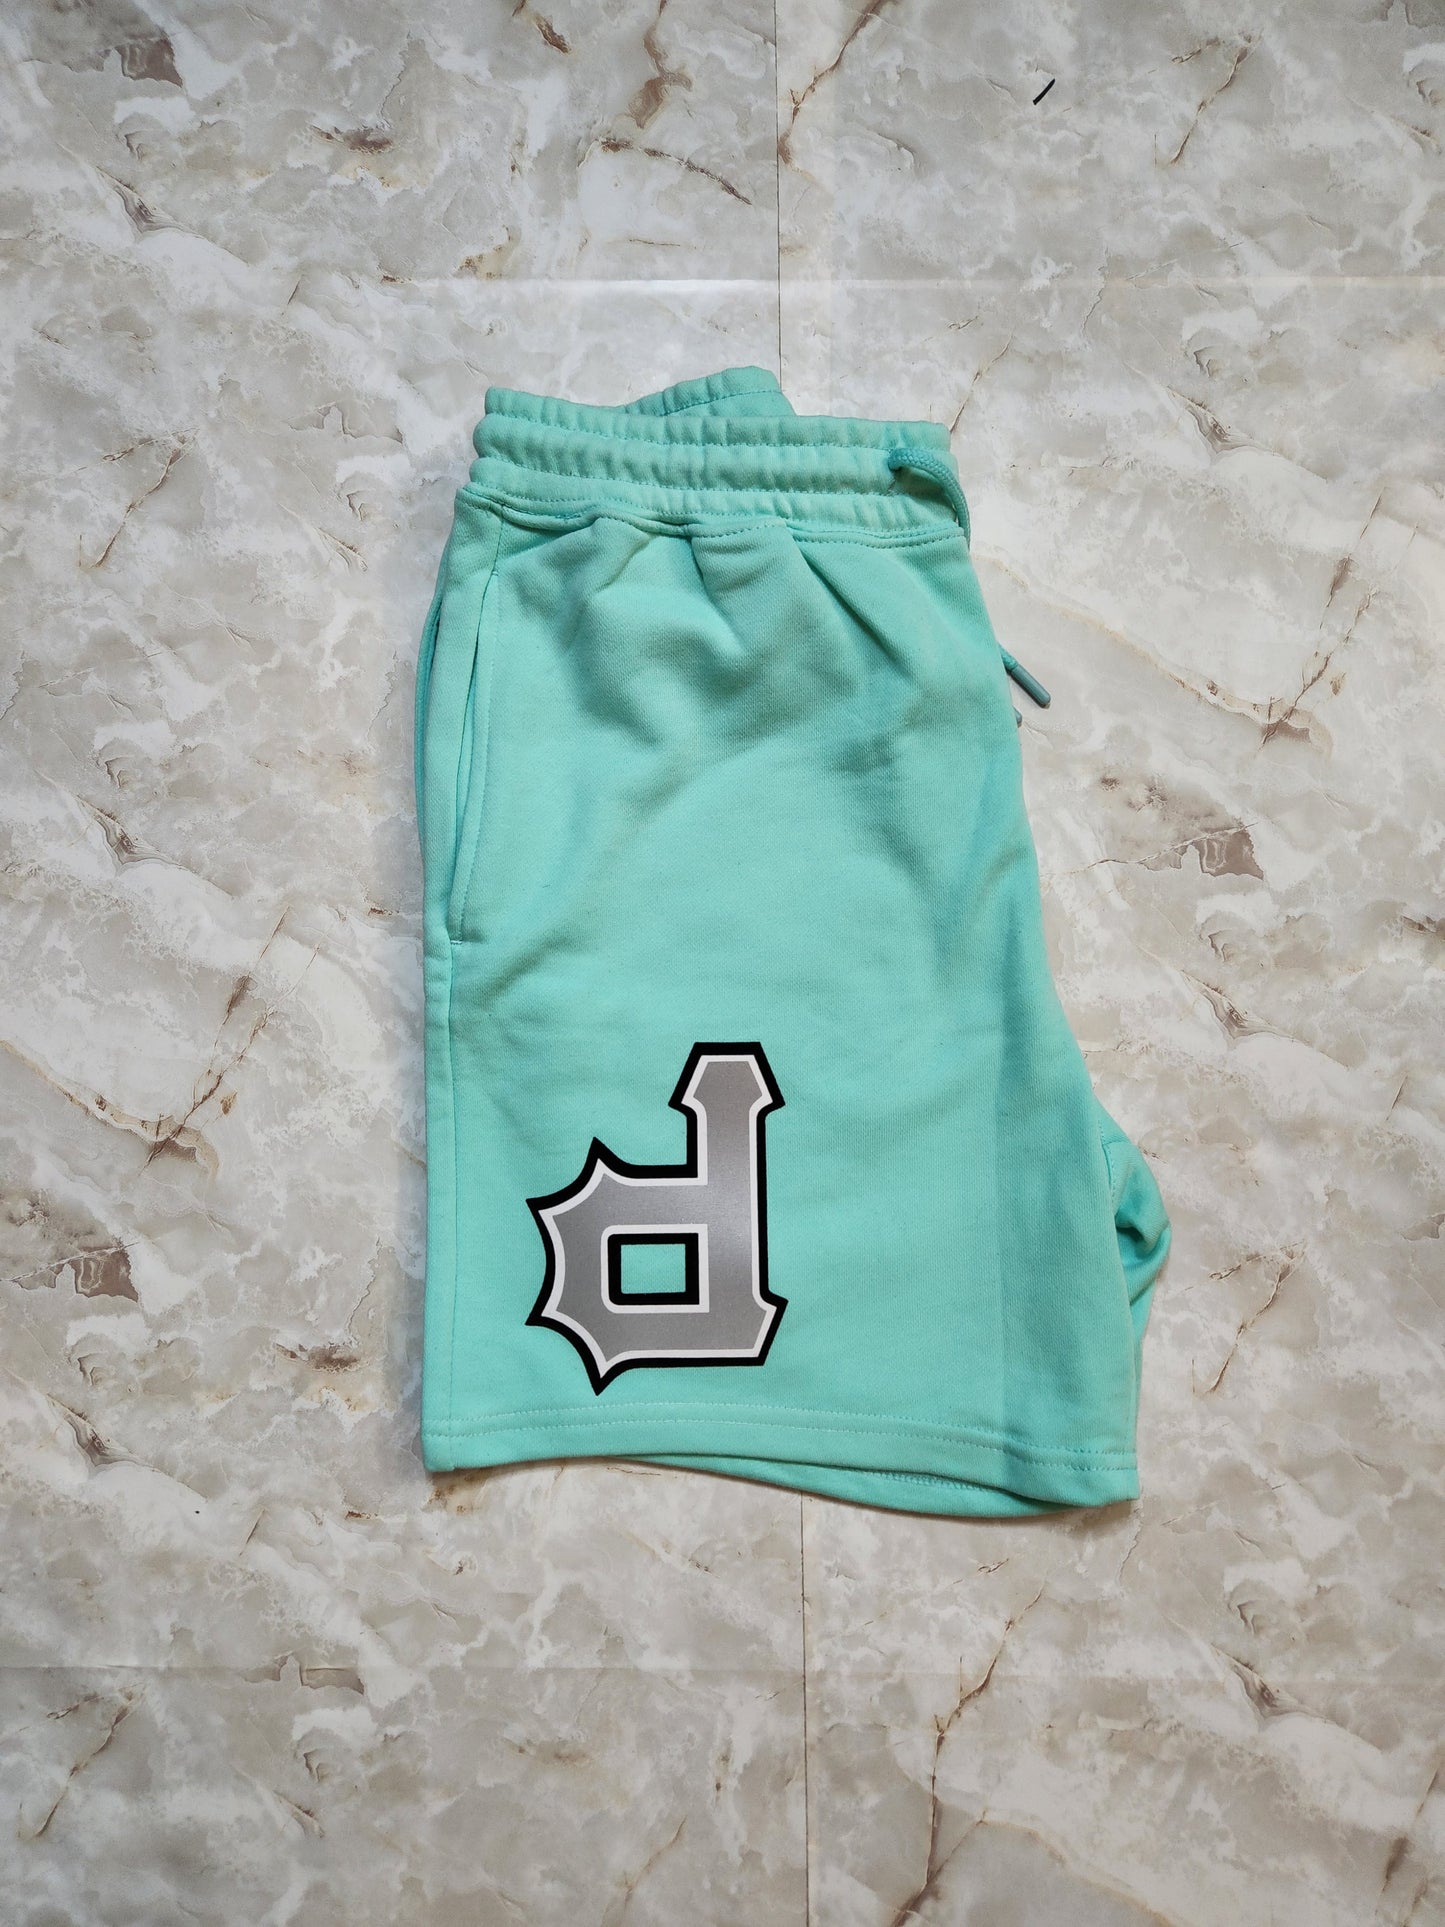 Mint P Shorts - Centre Ave Clothing Co.